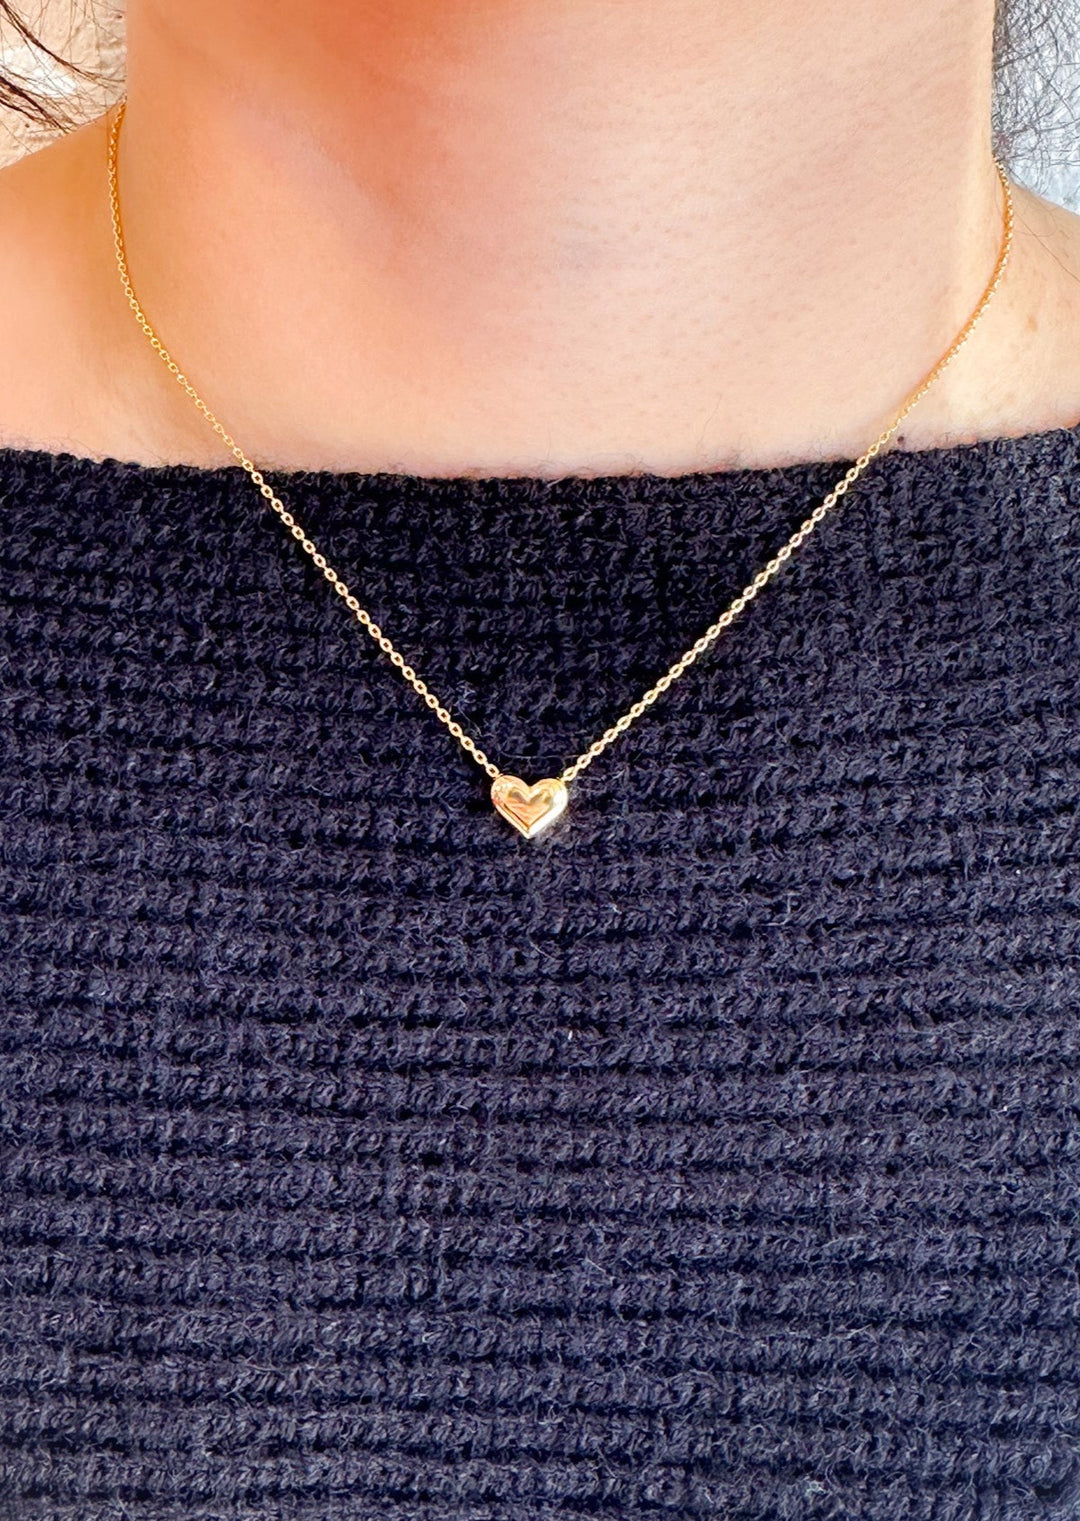 Mini Gold Heart Necklace, Jewelry, Adeline, Adeline, dallas boutique, dallas texas, texas boutique, women's boutique dallas, adeline boutique, dallas boutique, trendy boutique, affordable boutique